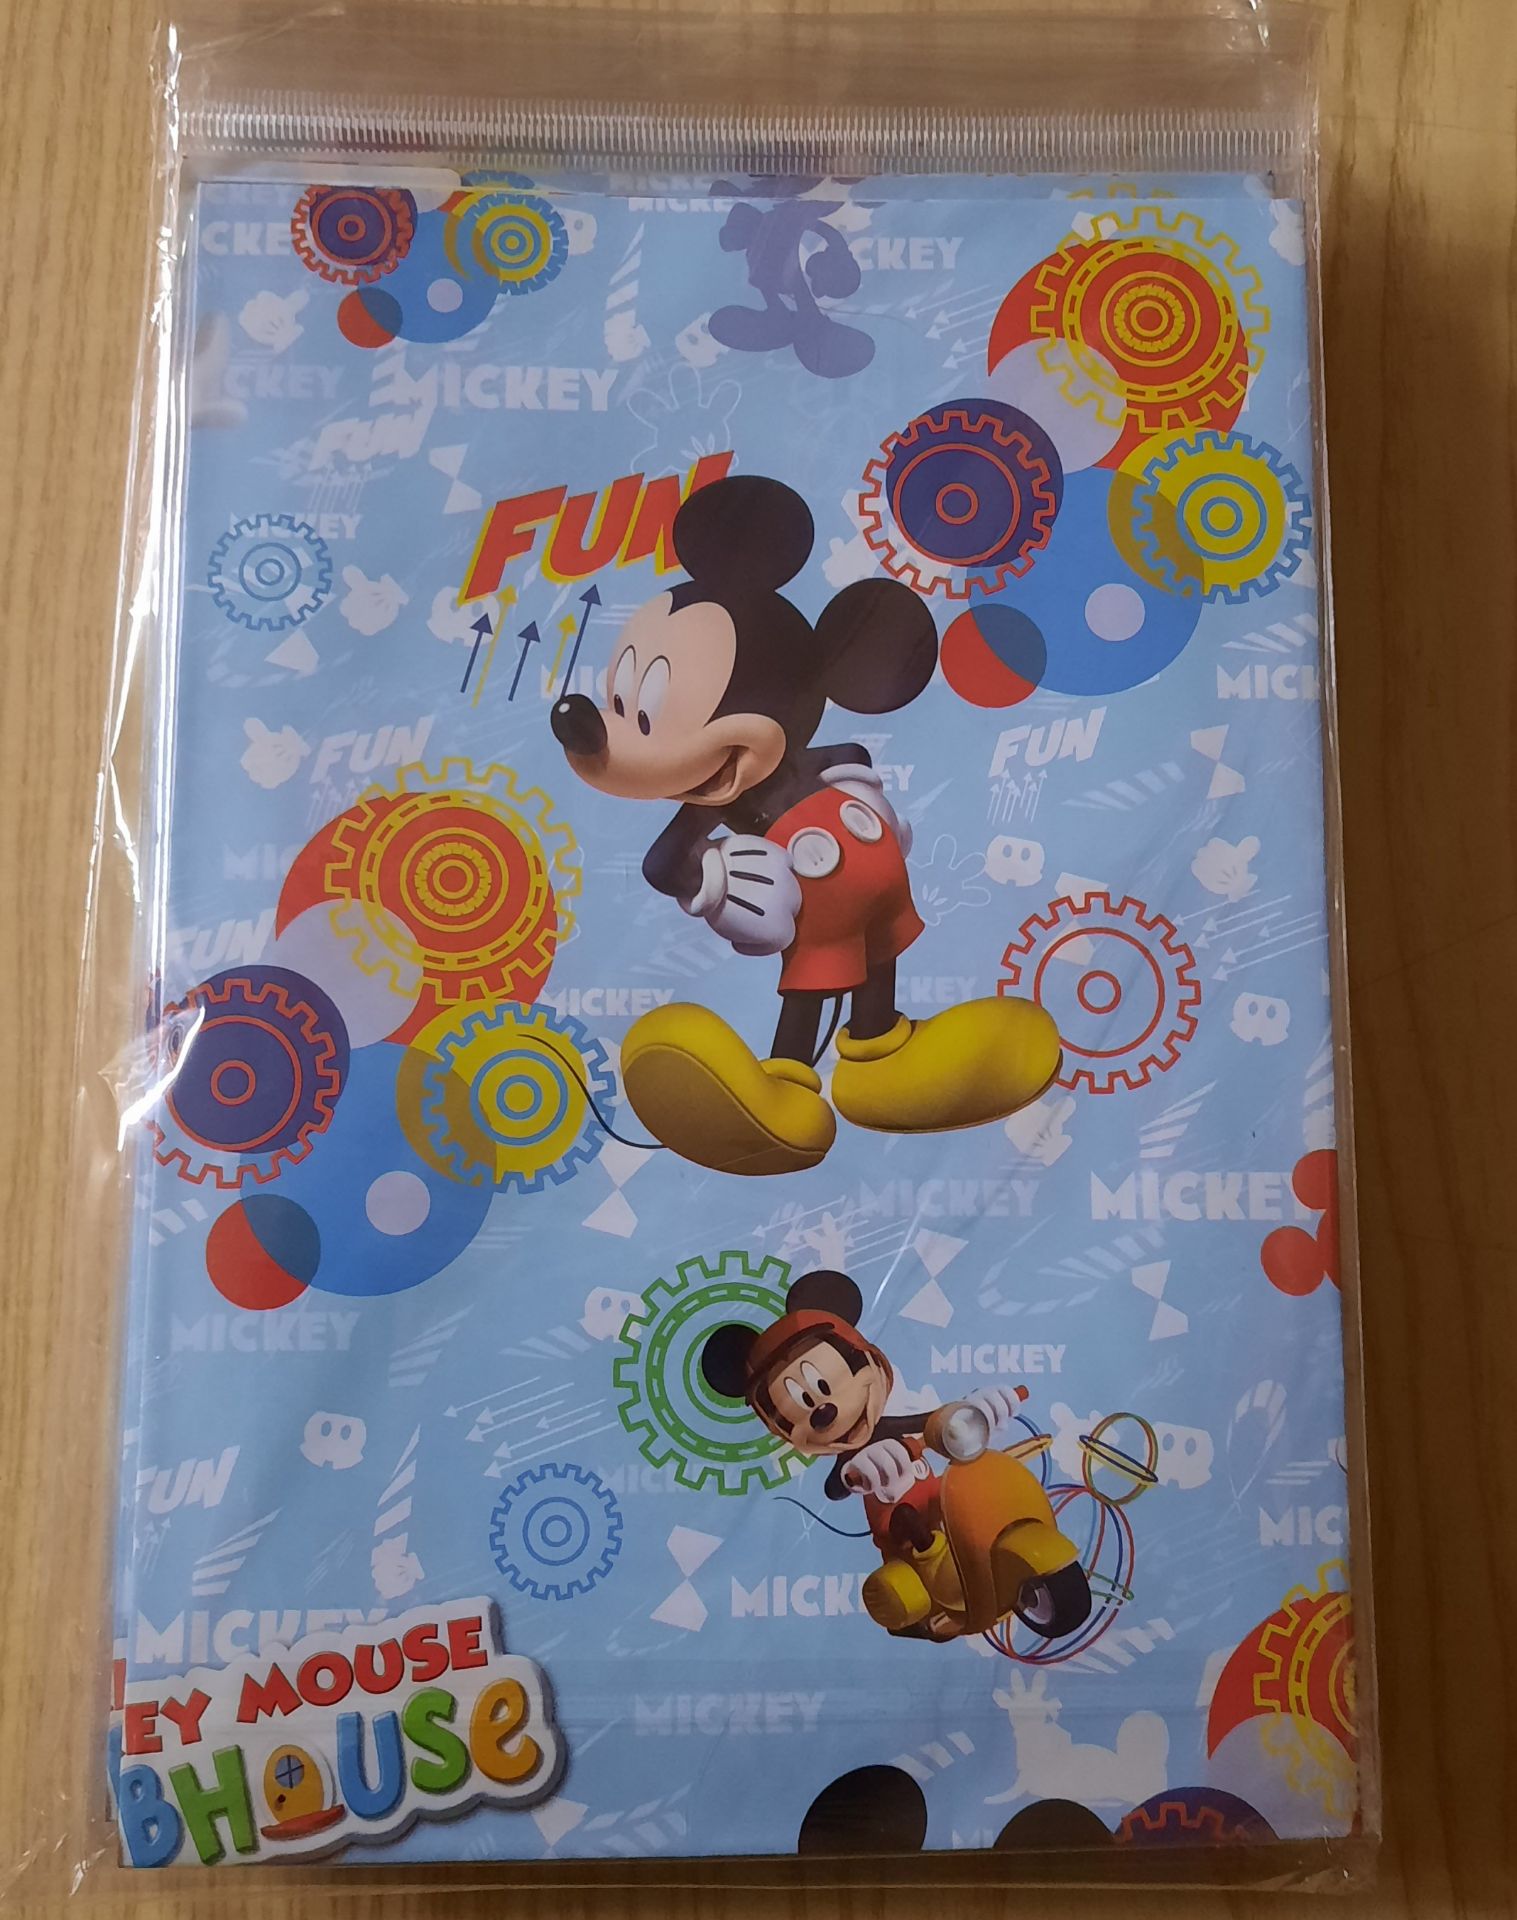 X 48 BRAND NEW MICKEY MOUSE CLUB HOUSER GIFTRAP SHEETS AND X 48 GIFT TAGS.